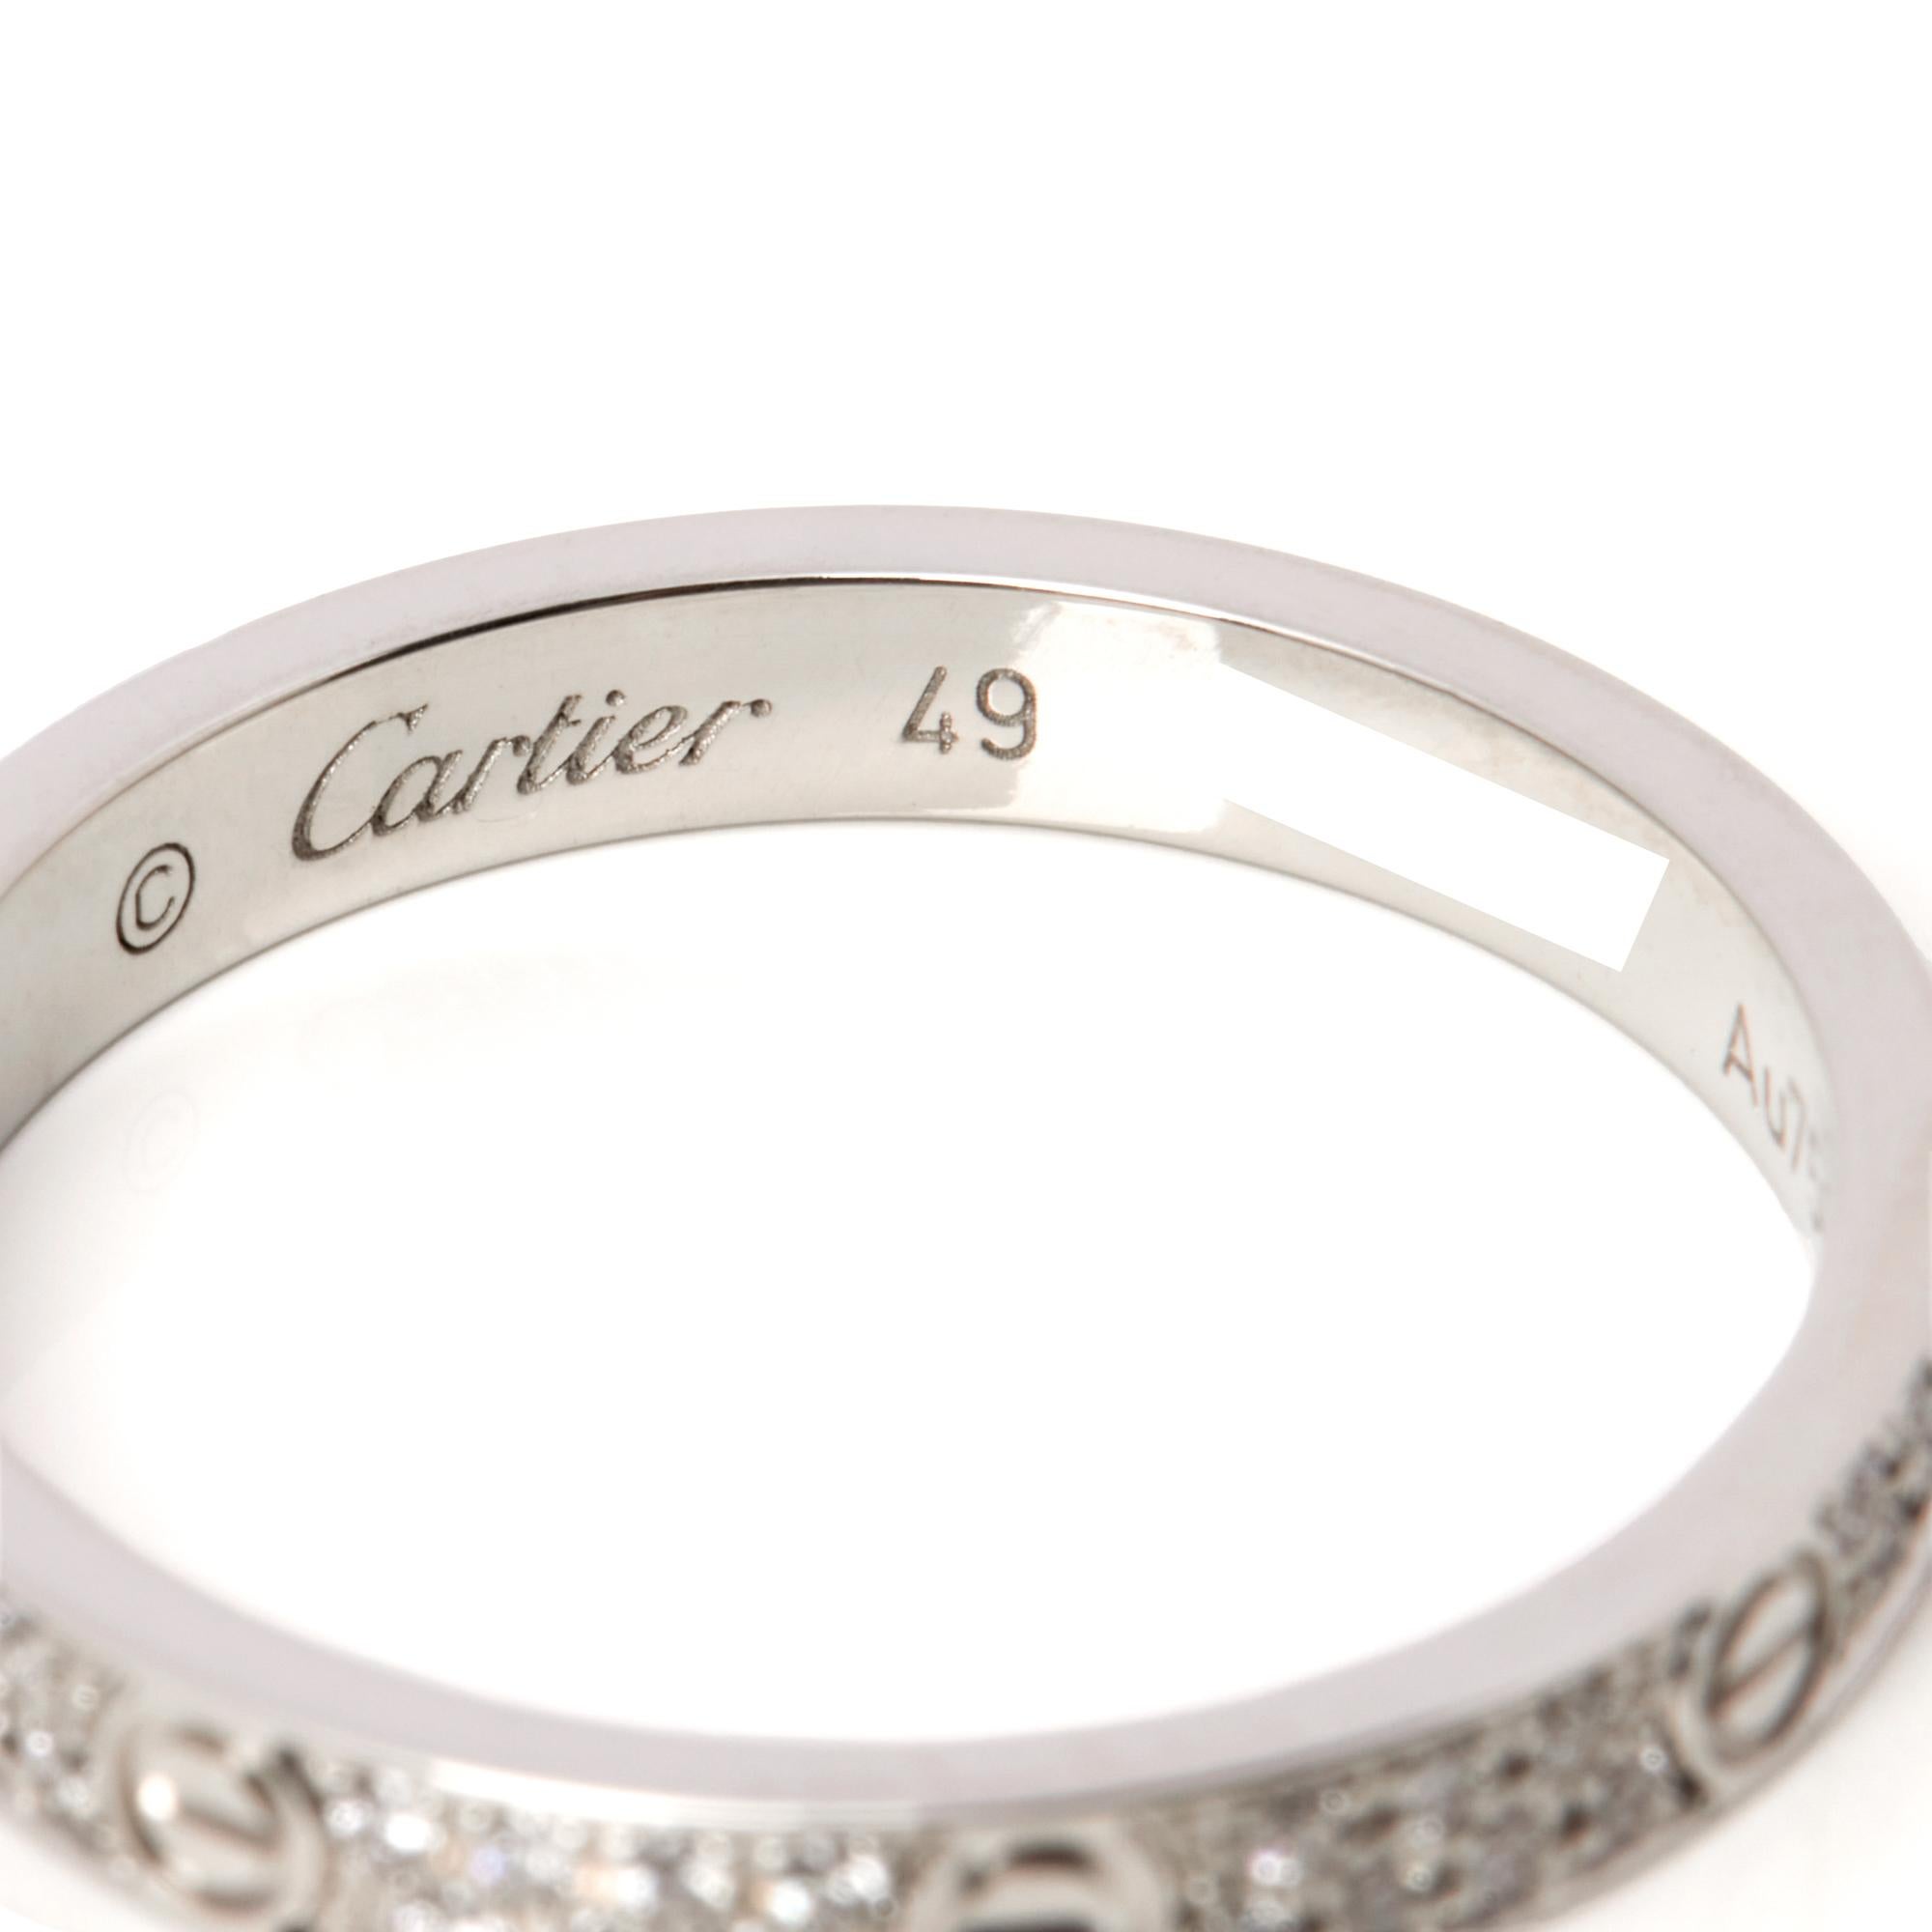 RRP	£4,850
ITEM CONDITION	Excellent
XUPES REFERENCE	J862
MANUFACTURER	Cartier
MODEL	Love
MODEL REFERENCE	MDY543
AGE	2021
GENDER	Women's
ACCOMPANIED BY	Box & Papers
UK RING SIZE	J 1/2
EU RING SIZE	49
US RING SIZE	4.75
BAND WIDTH	2.6mm
TOTAL